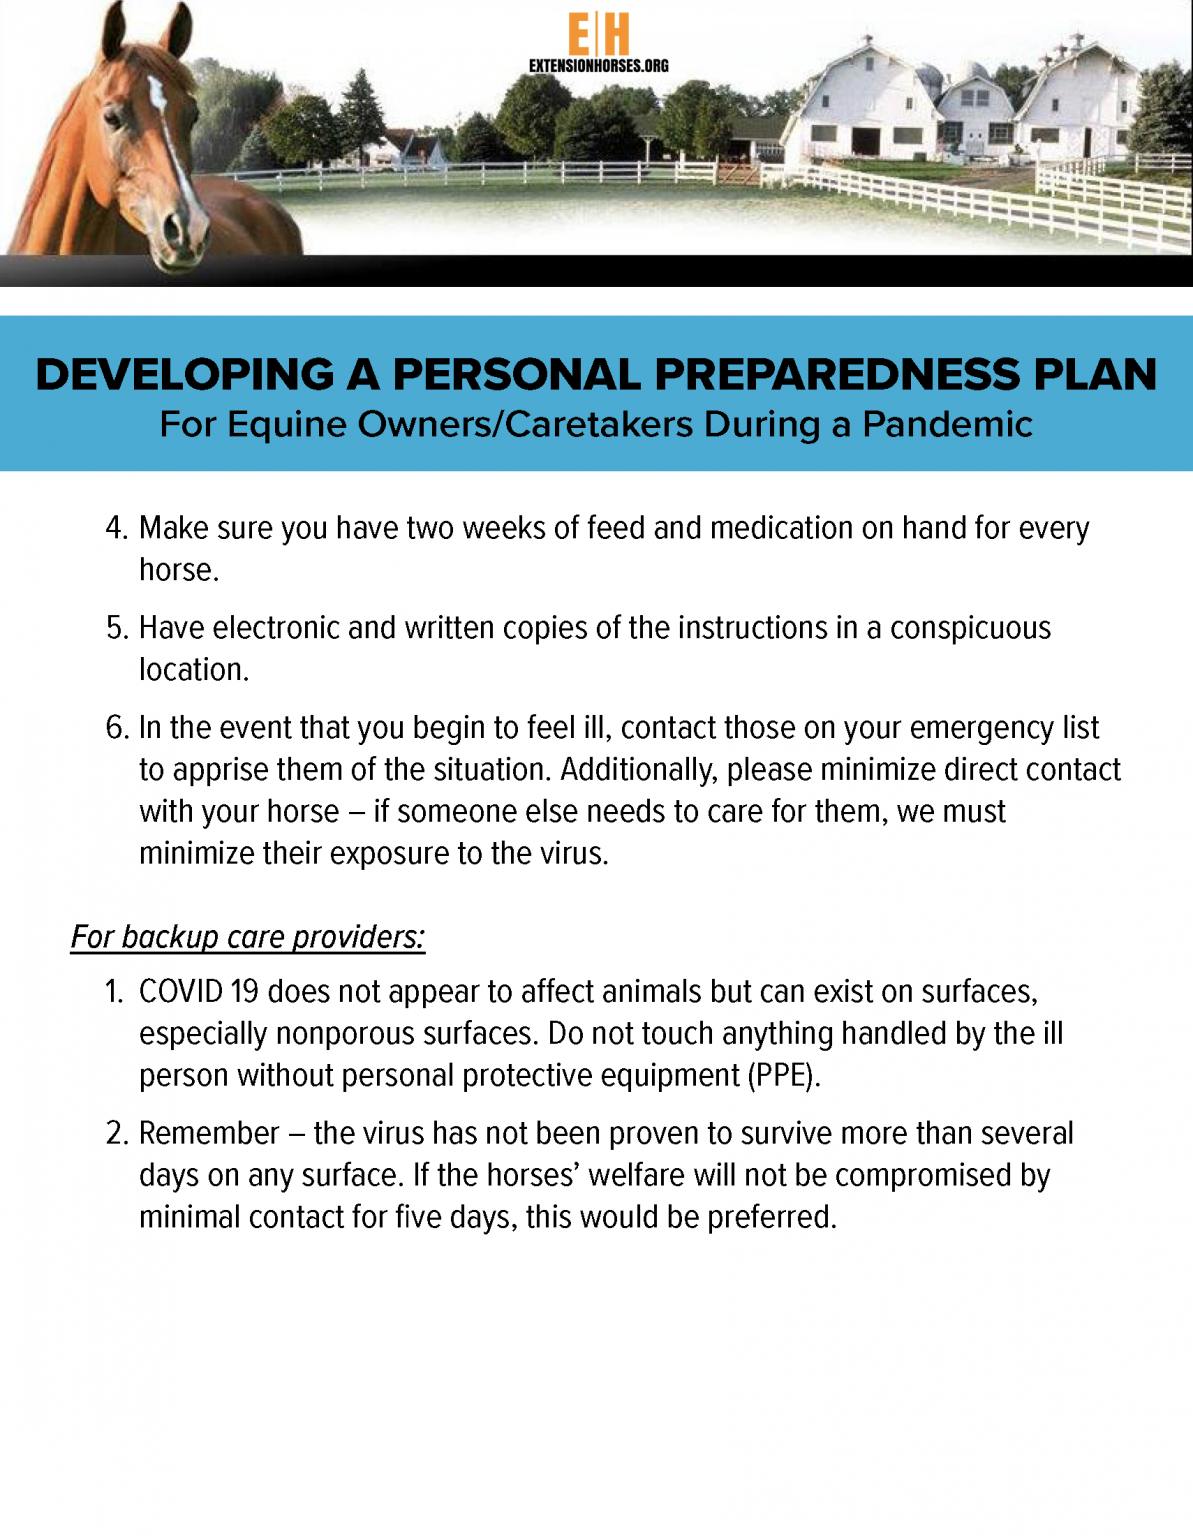 Personal-Preparedness-Plan-for-Equine-Owners_Page_2-1193x1536.png